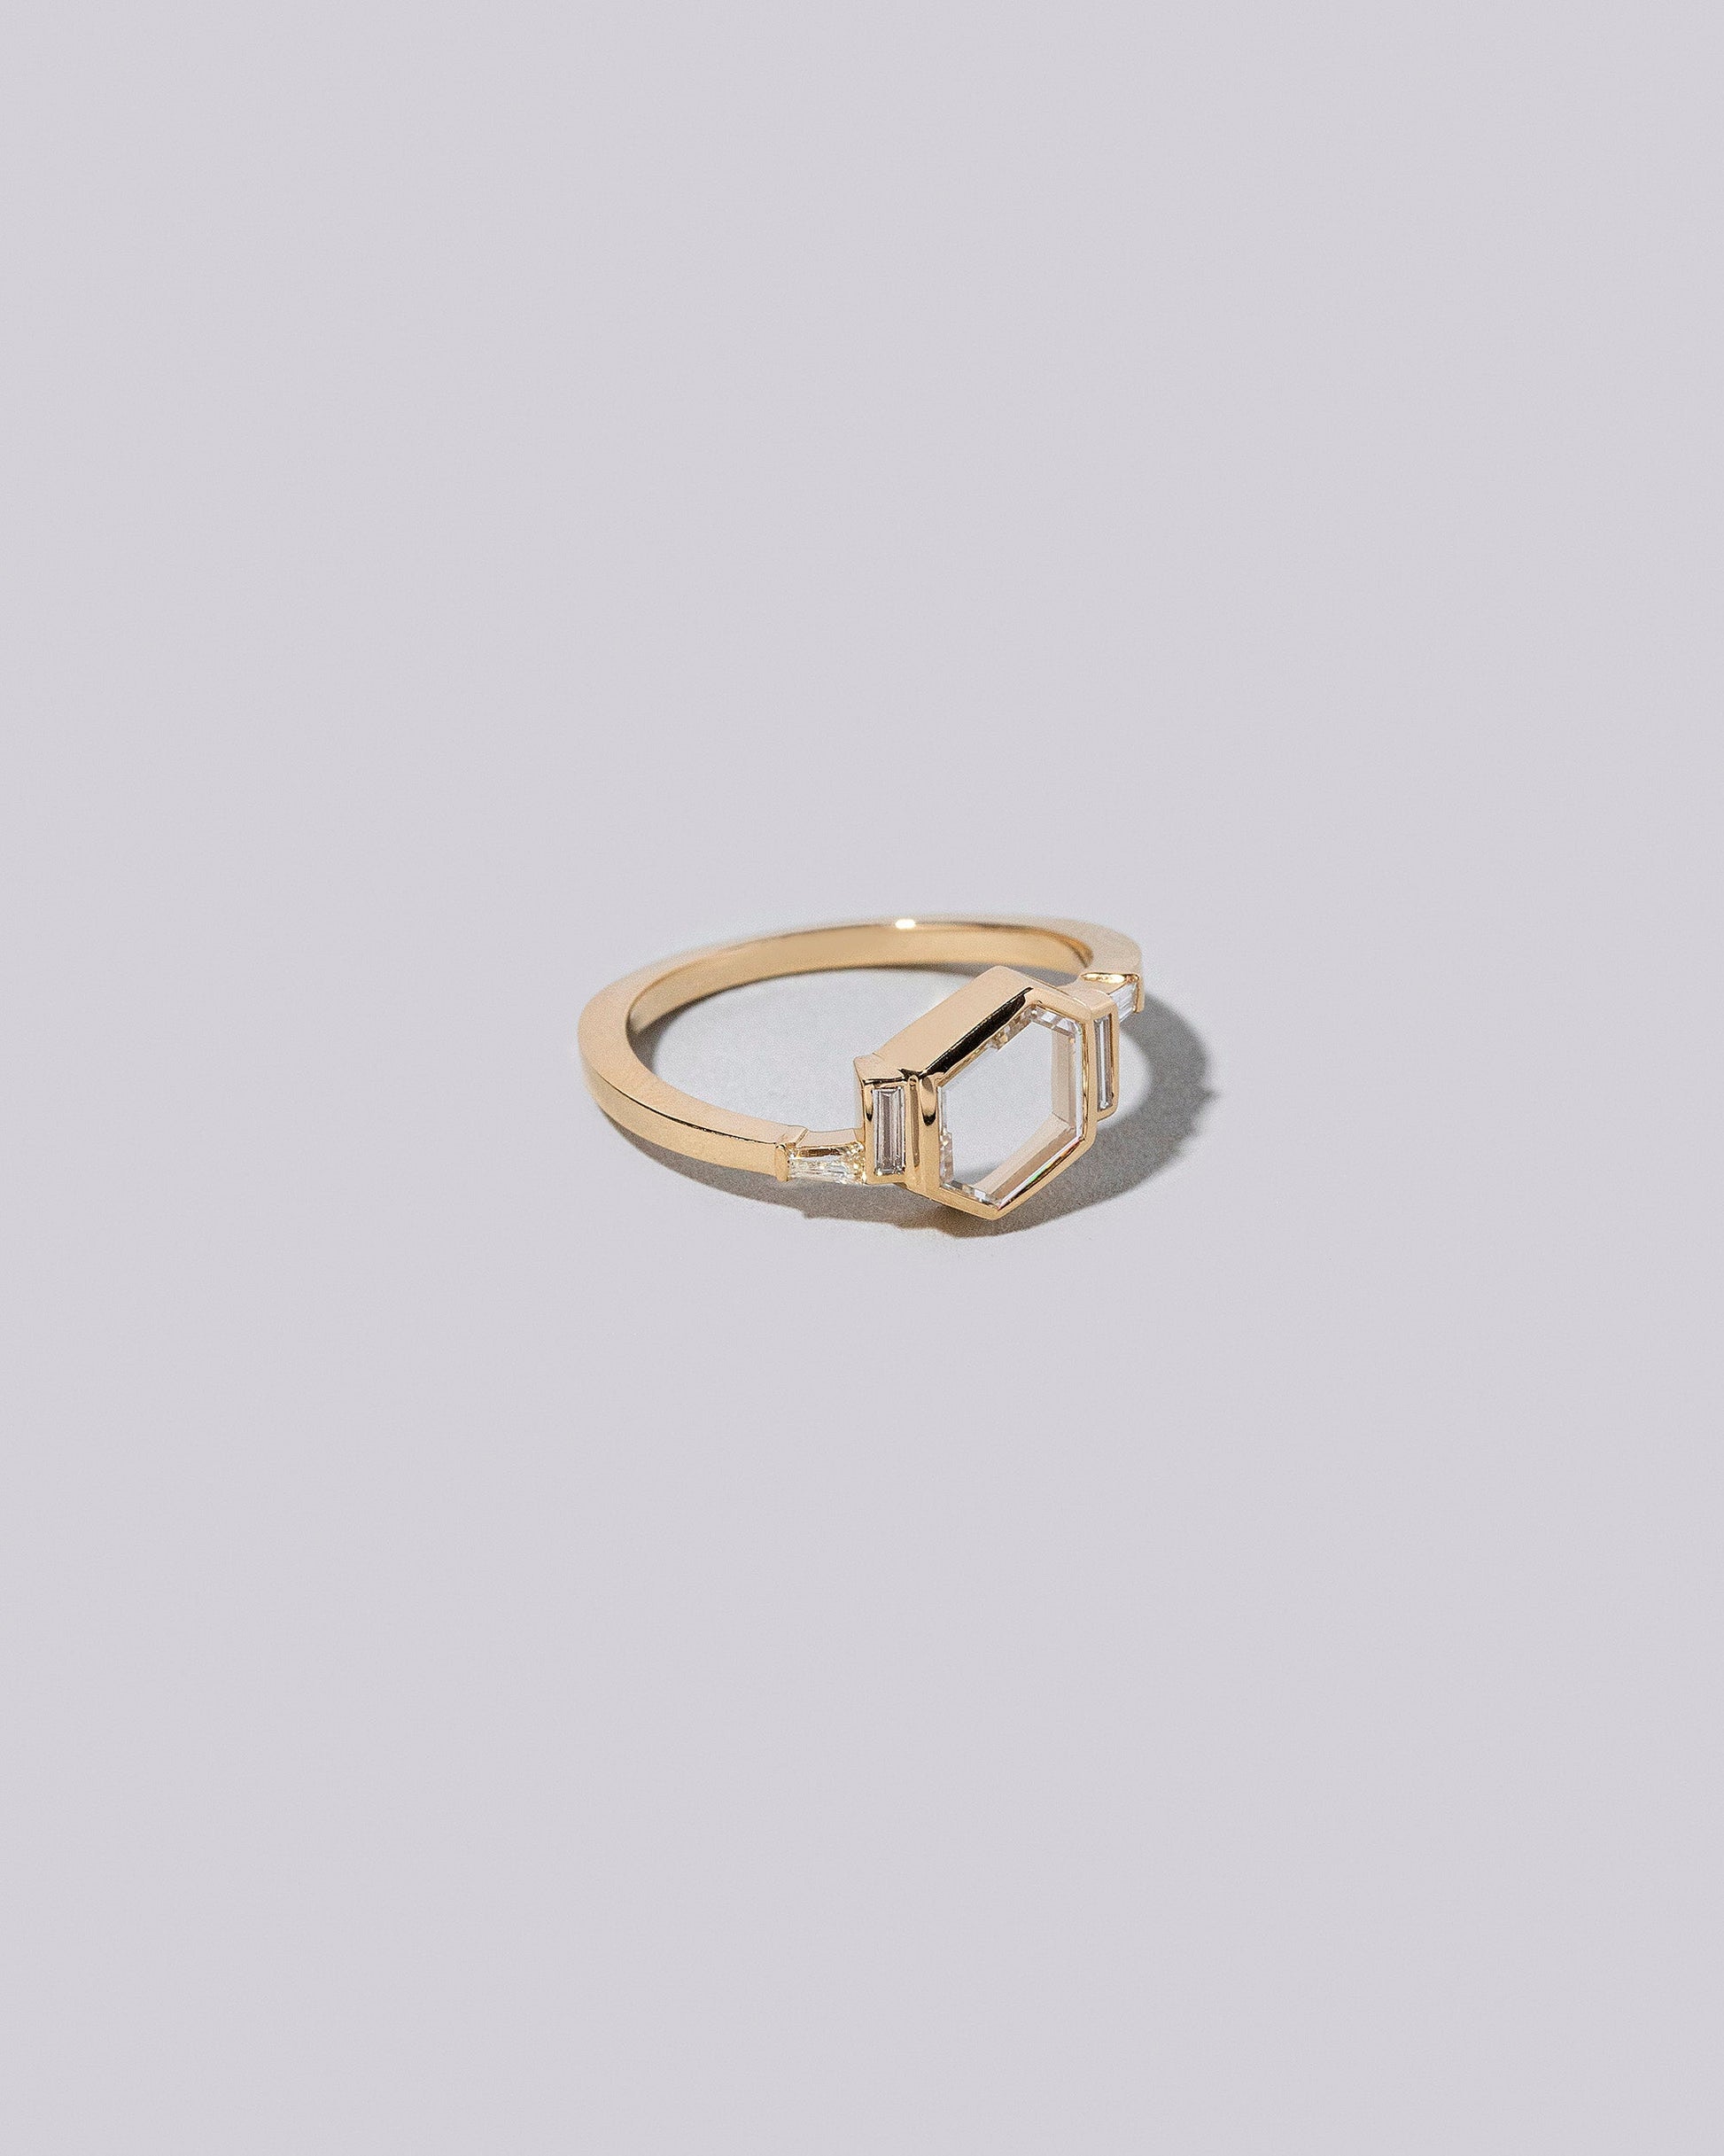 Kerid Ring on light colored background.